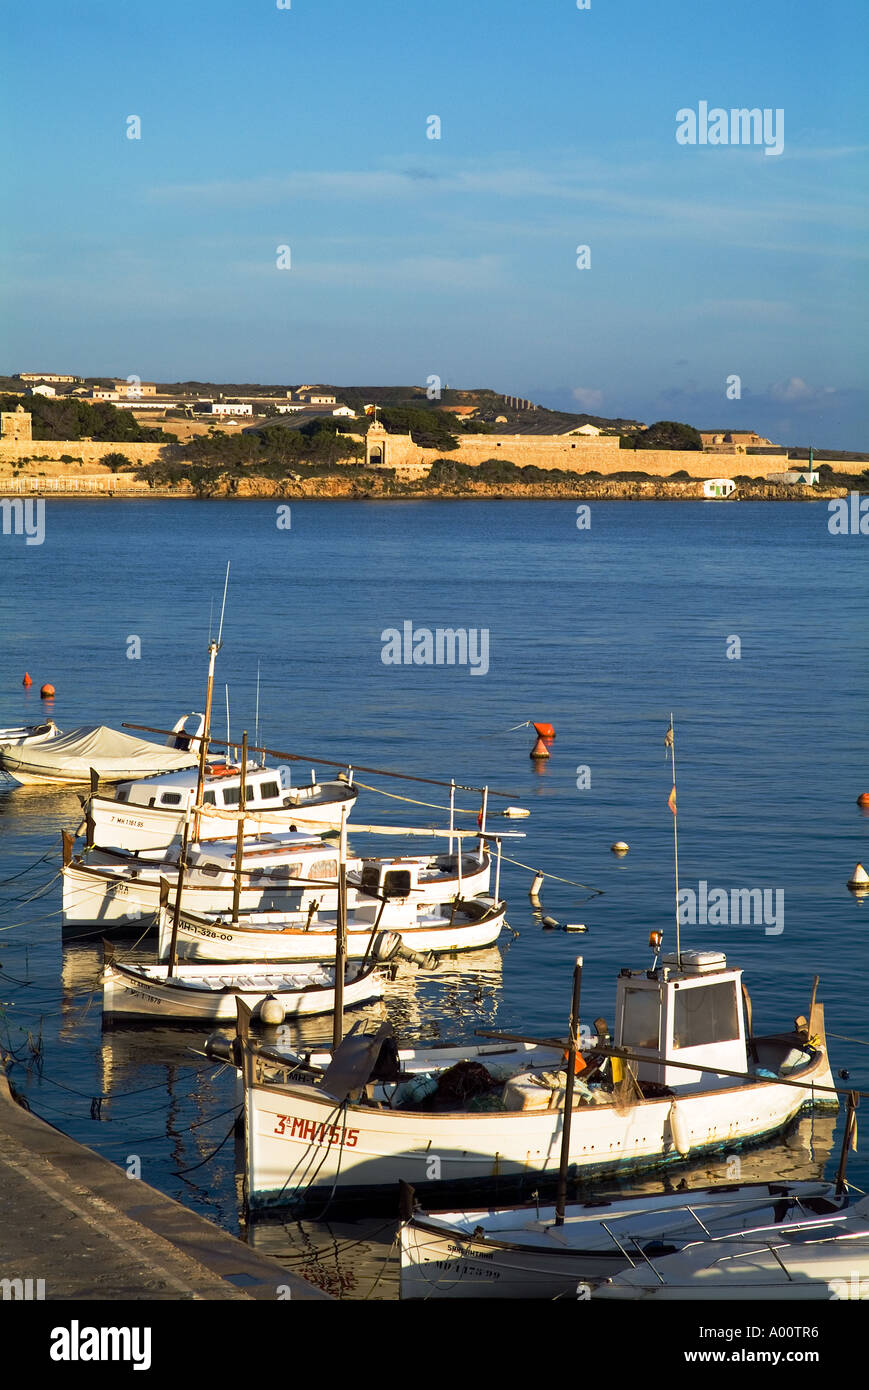 dh Cales Fonts ES CASTELL MENORCA Traditional Menorcan fishing and pleasure boats fishery quayside boat Stock Photo